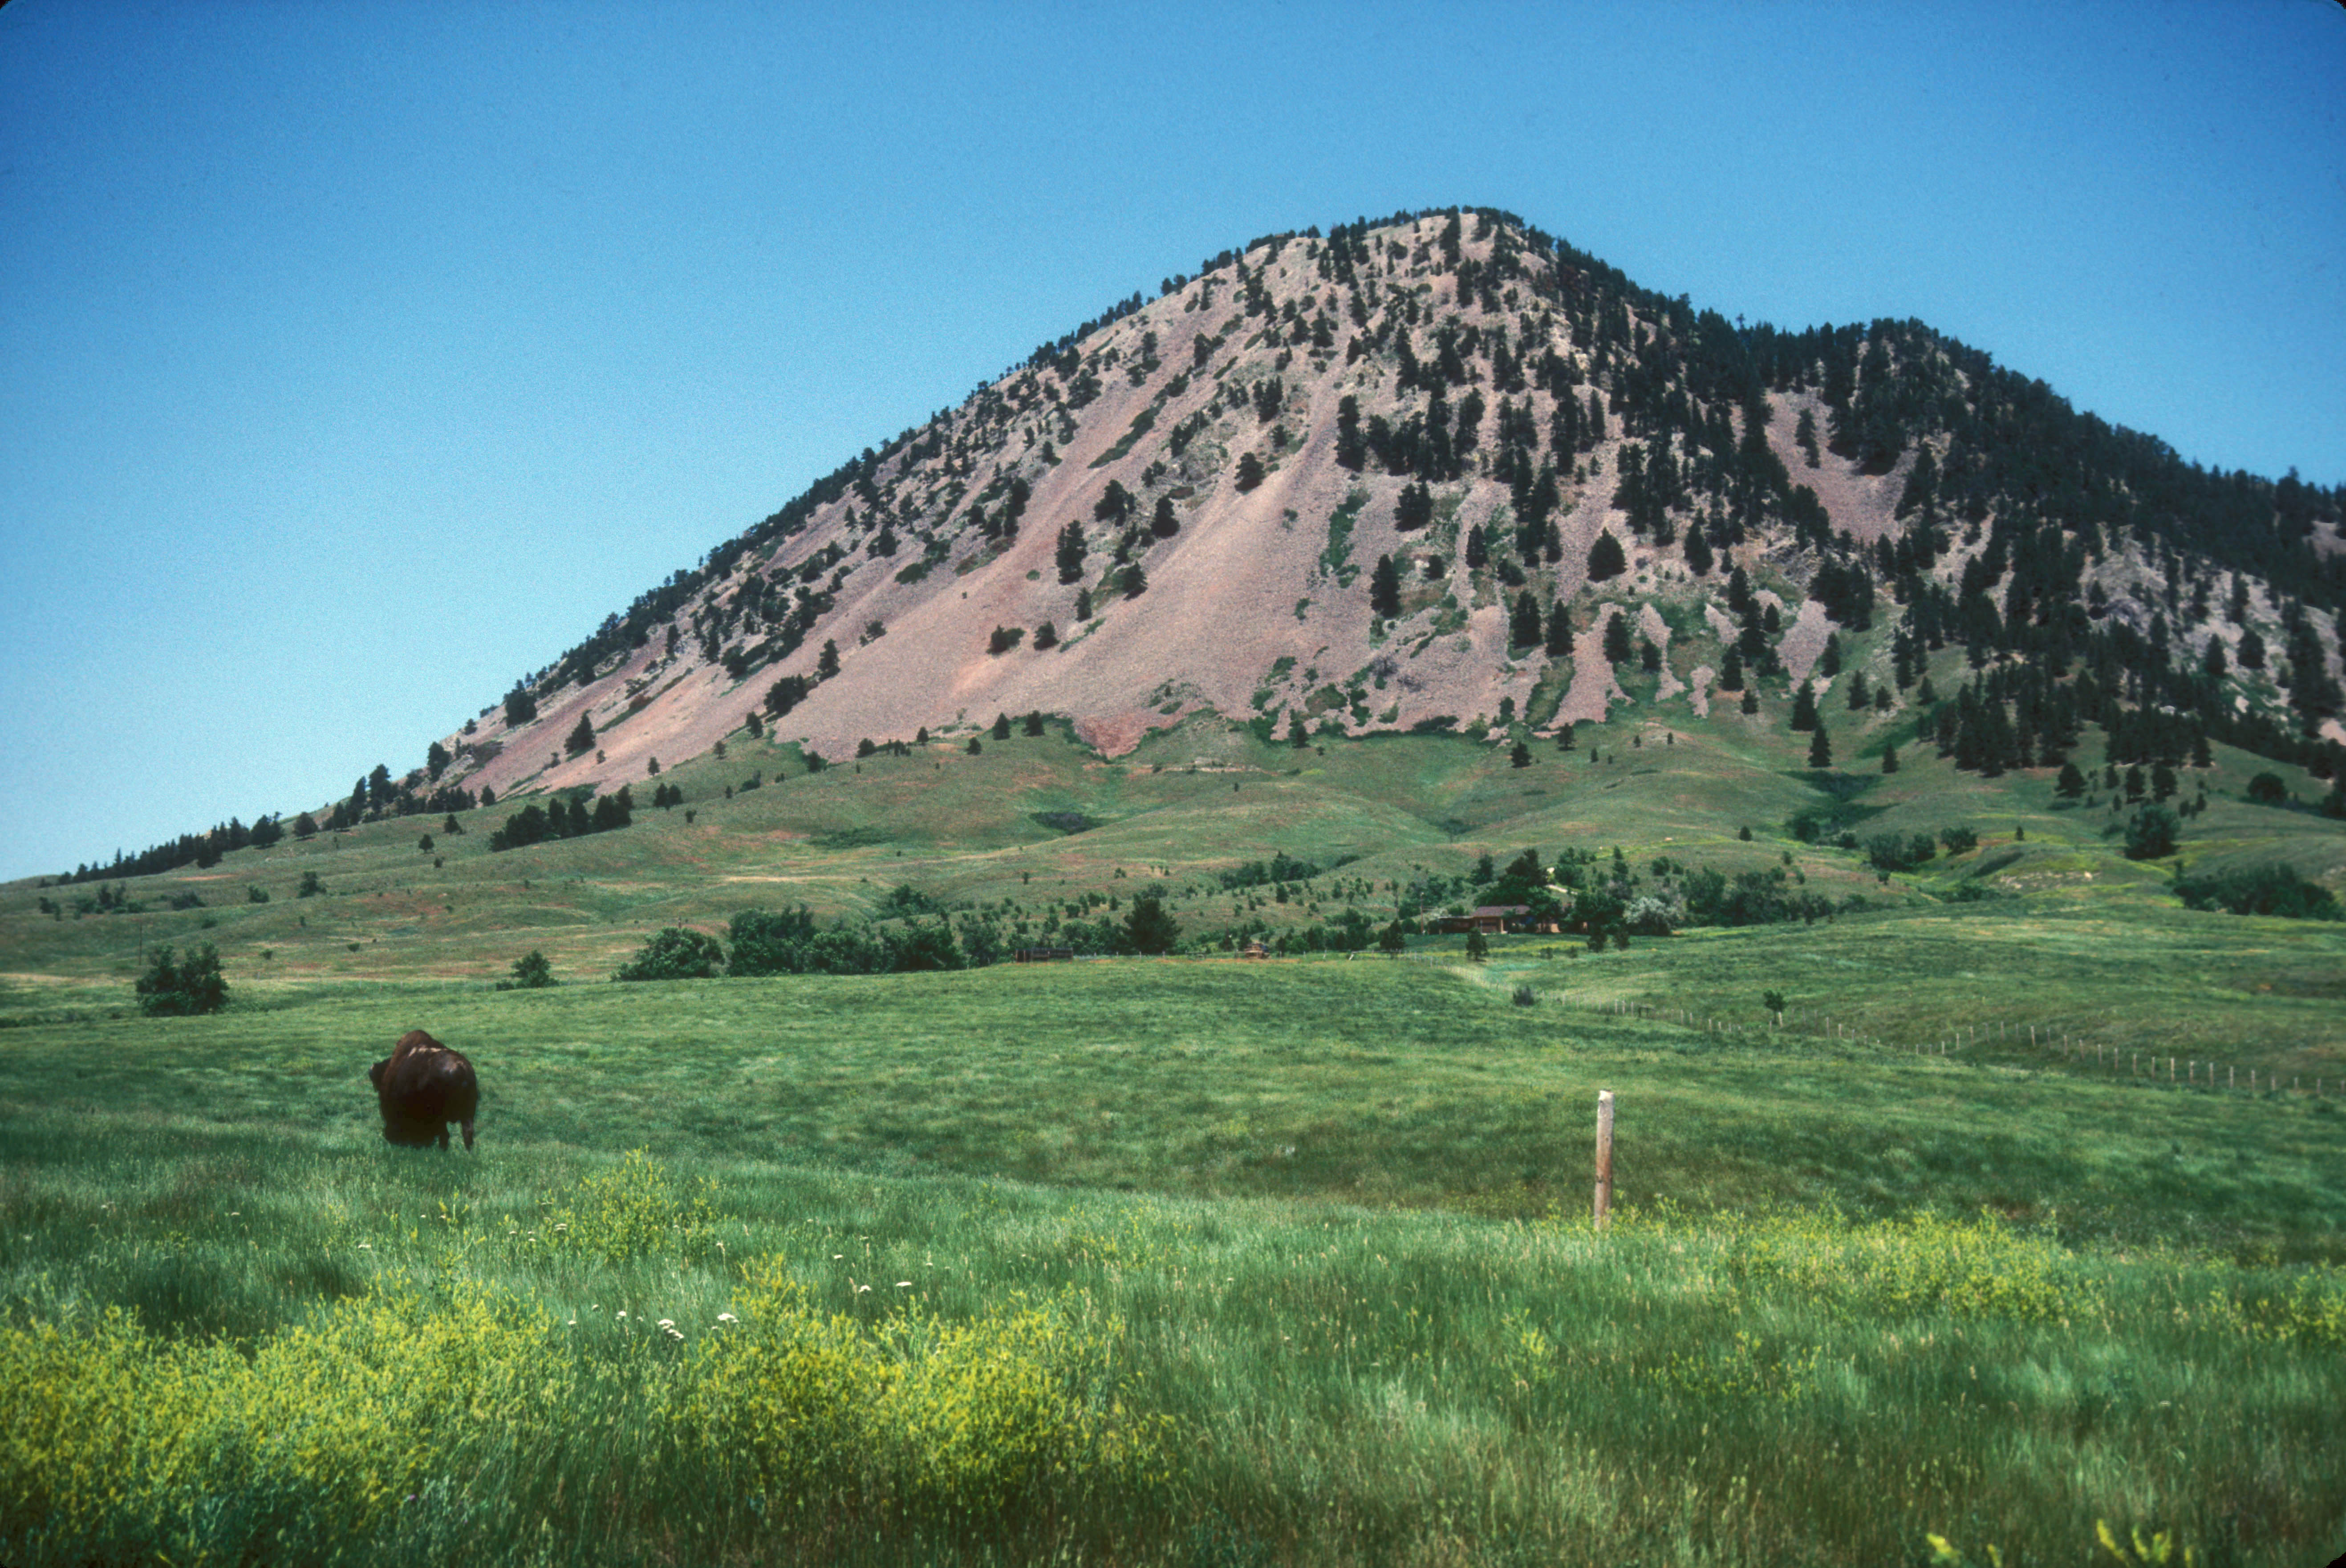 Bear Butte, located near Sturgis, South Dakota, is an indigenous religious site protected as a National Historic Landmark.